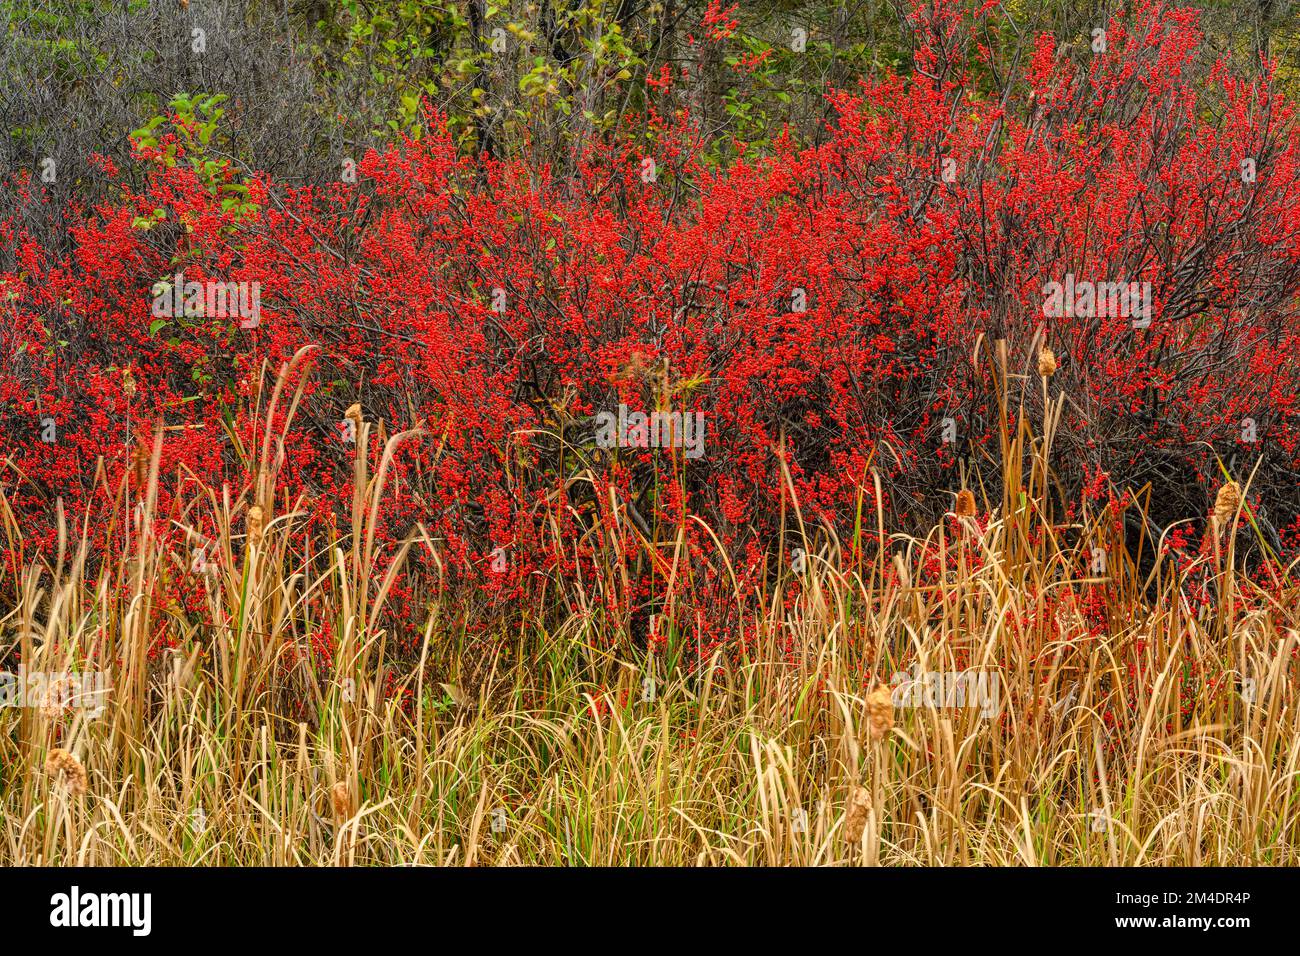 High bush cranberry, cattails, Blind River, Ontario, Canada Stock Photo